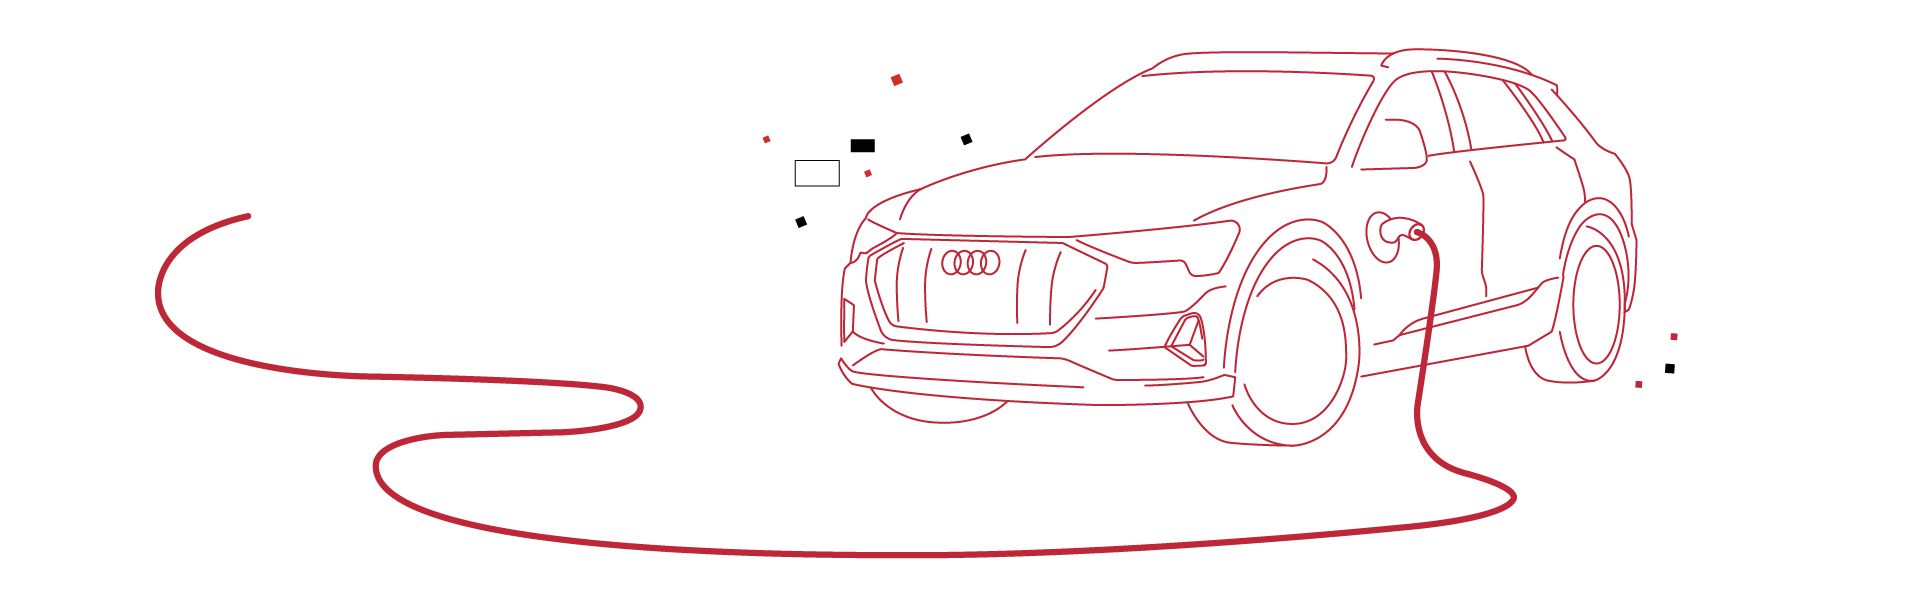 Audi insight ride: changing the work culture